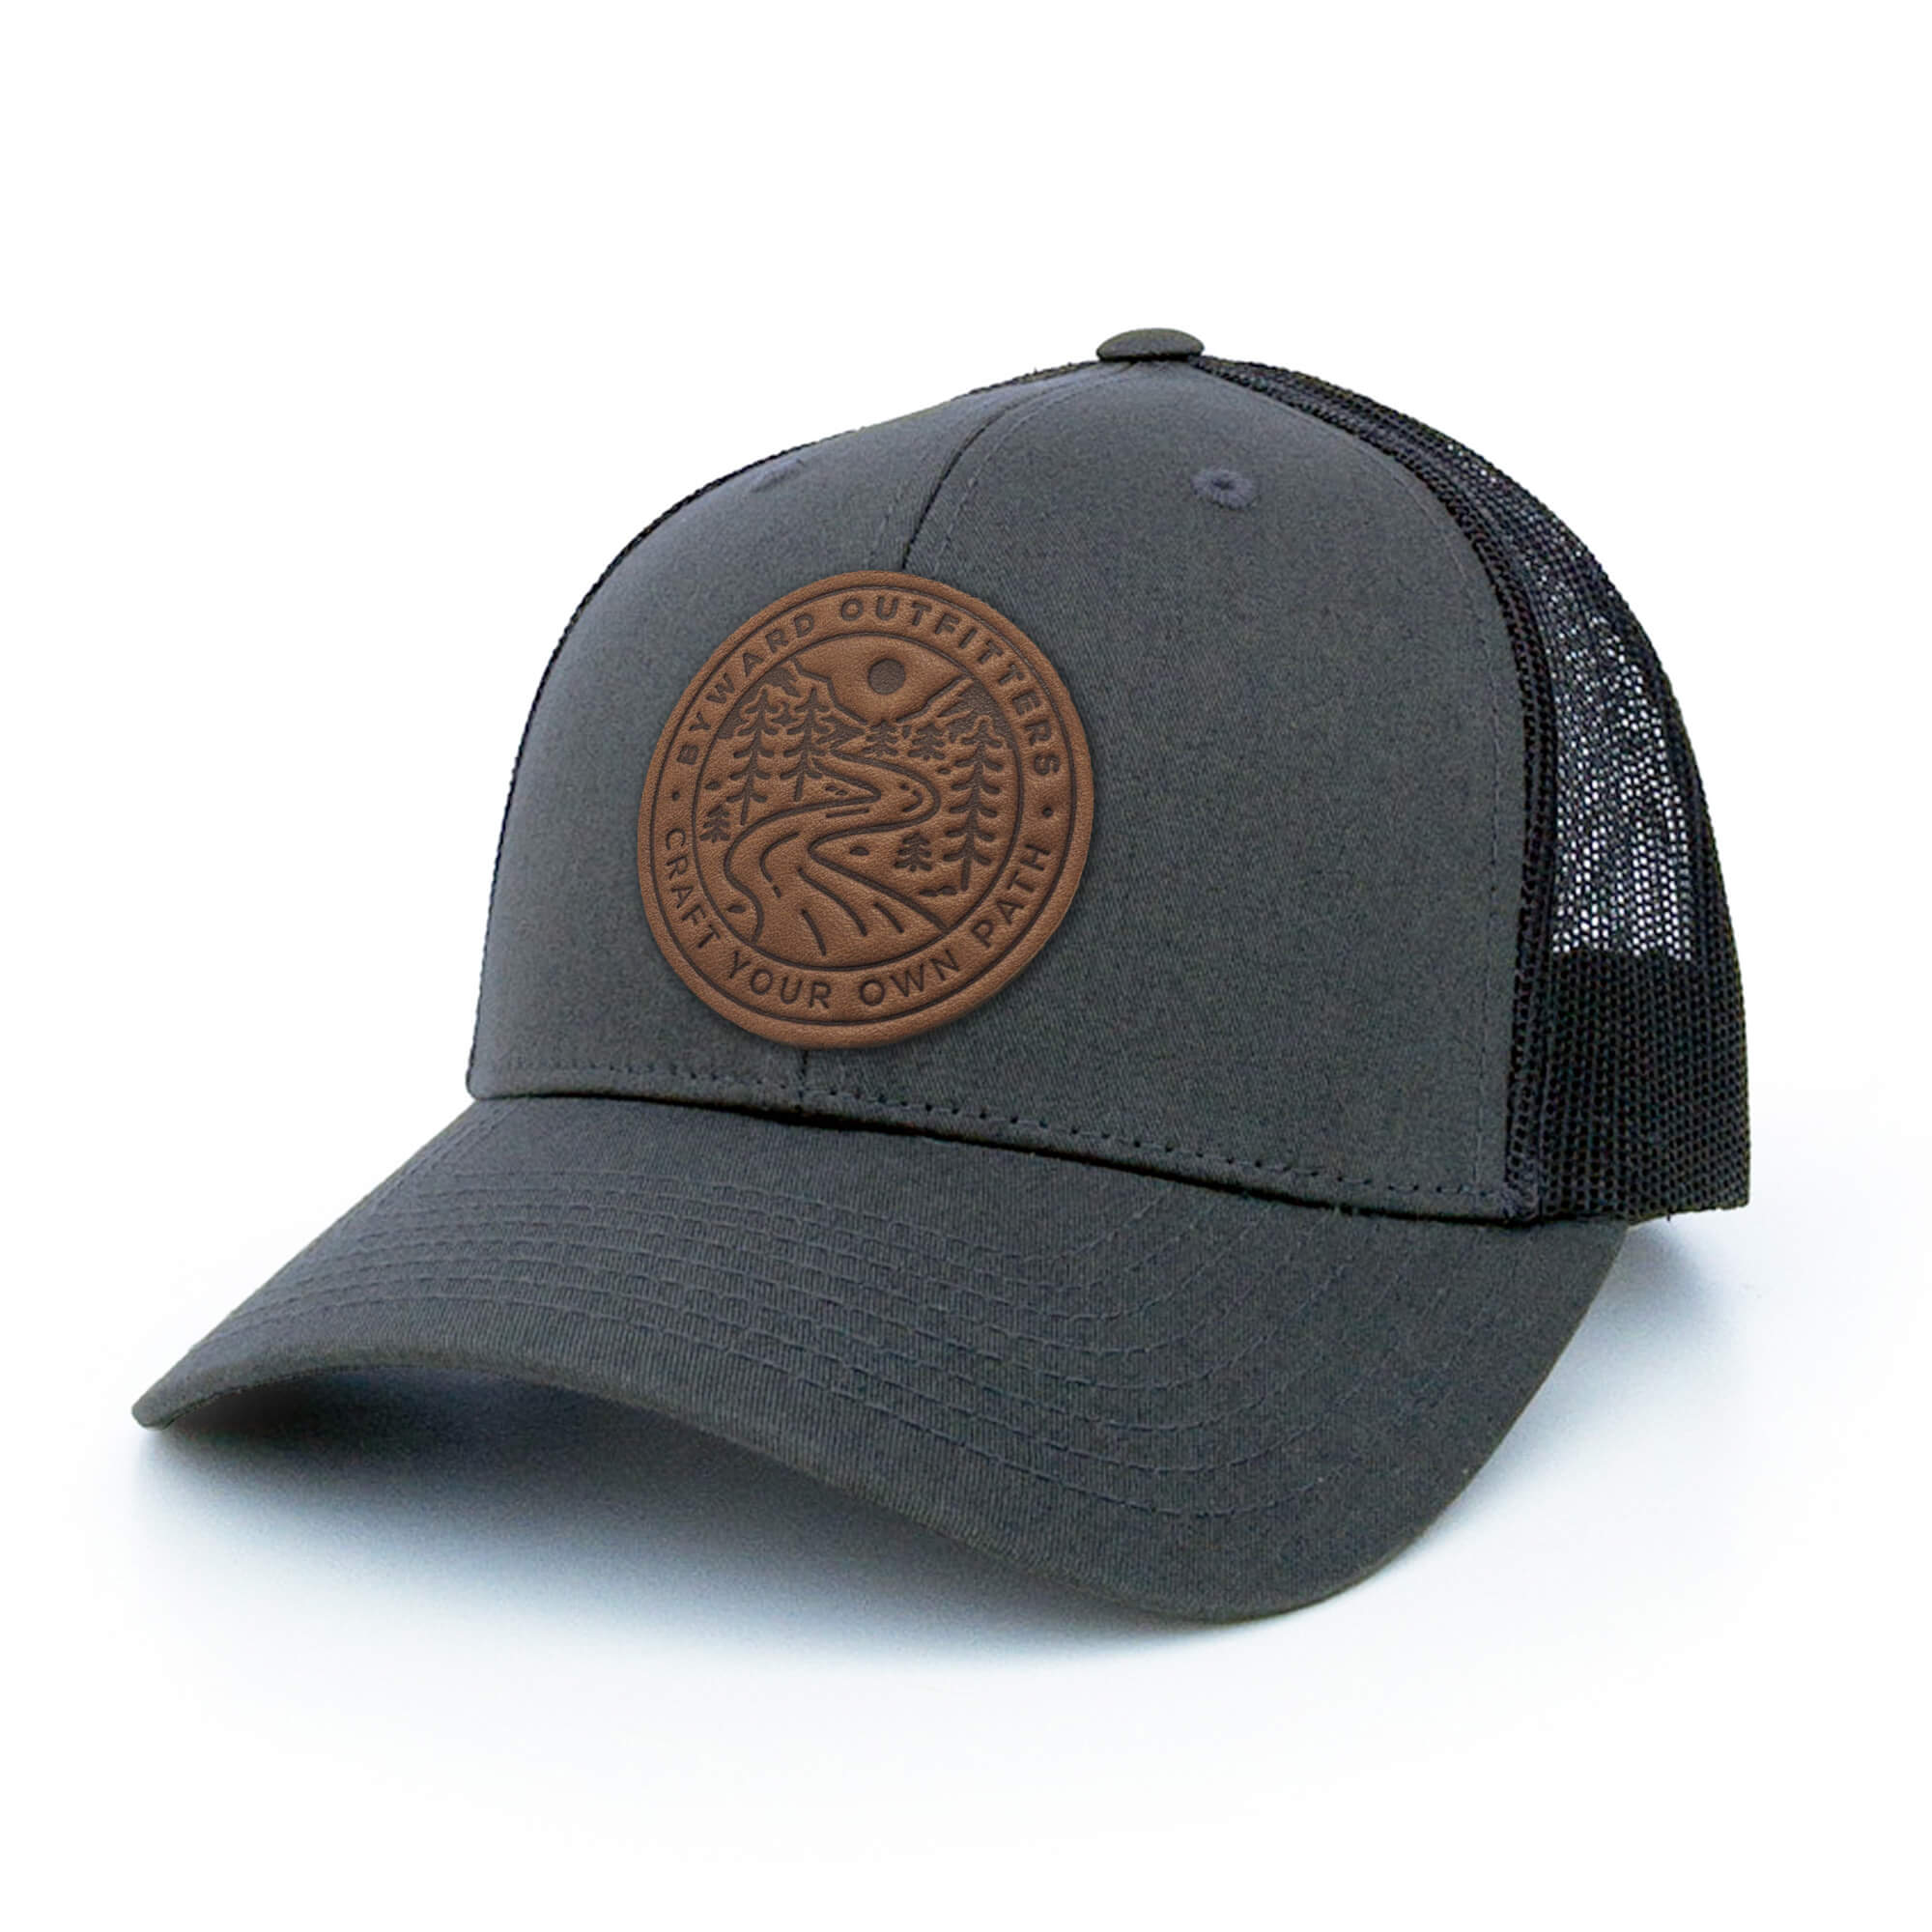 Charcoal trucker hat with full-grain leather patch of Winding Wilderness | BLACK-005-004, CHARC-005-004, NAVY-005-004, HGREY-005-004, MOSS-005-004, BROWN-005-004